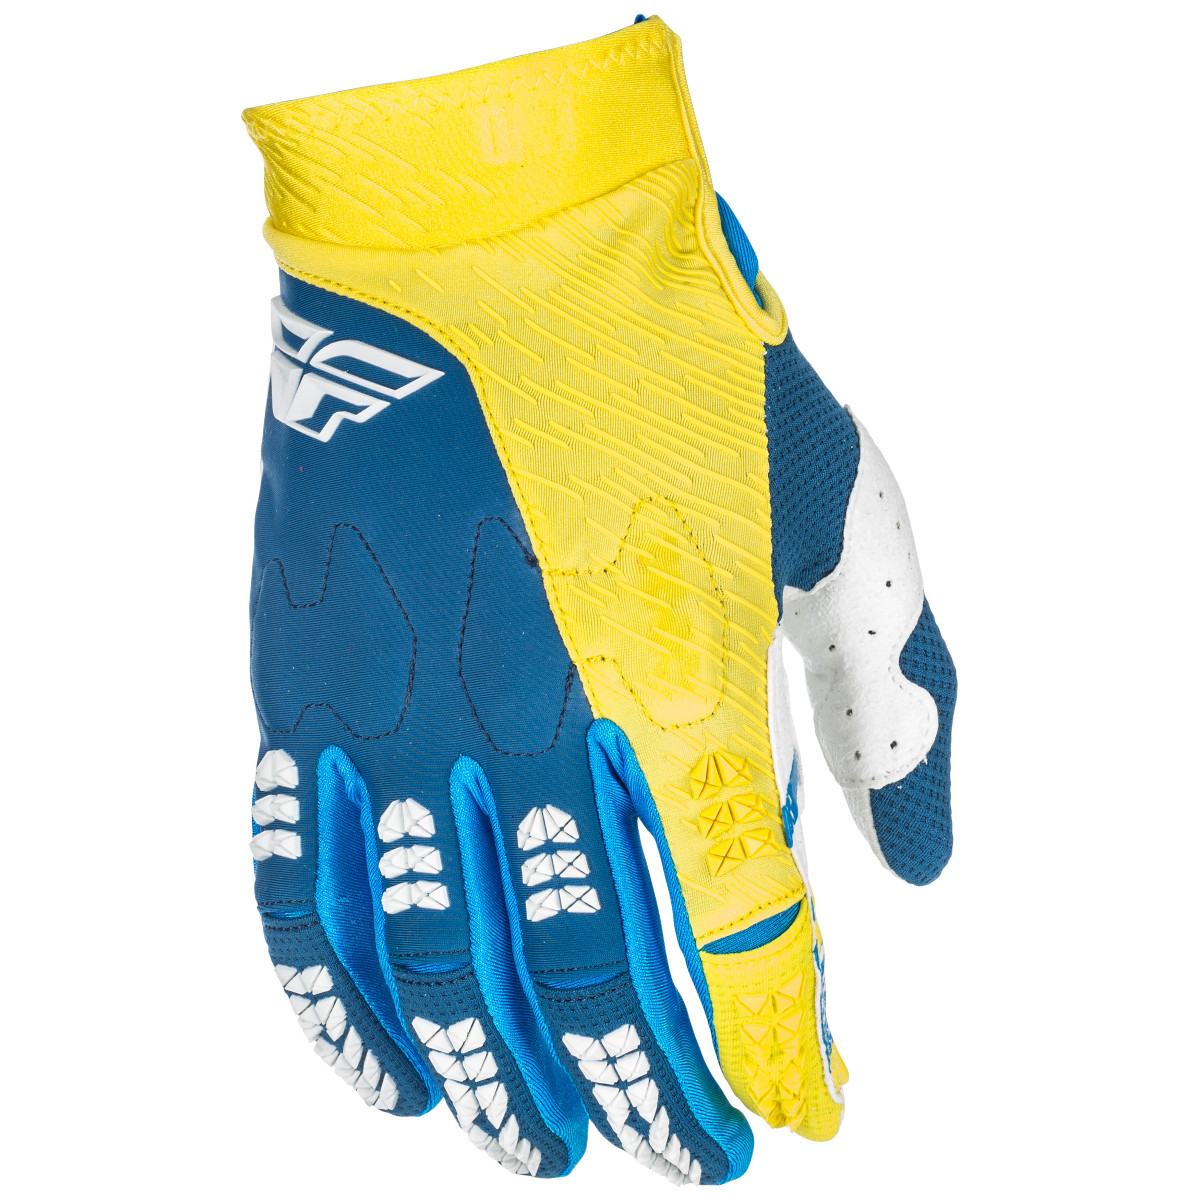 Fly Racing Gloves Evolution 2.0 Navy/Yellow/White